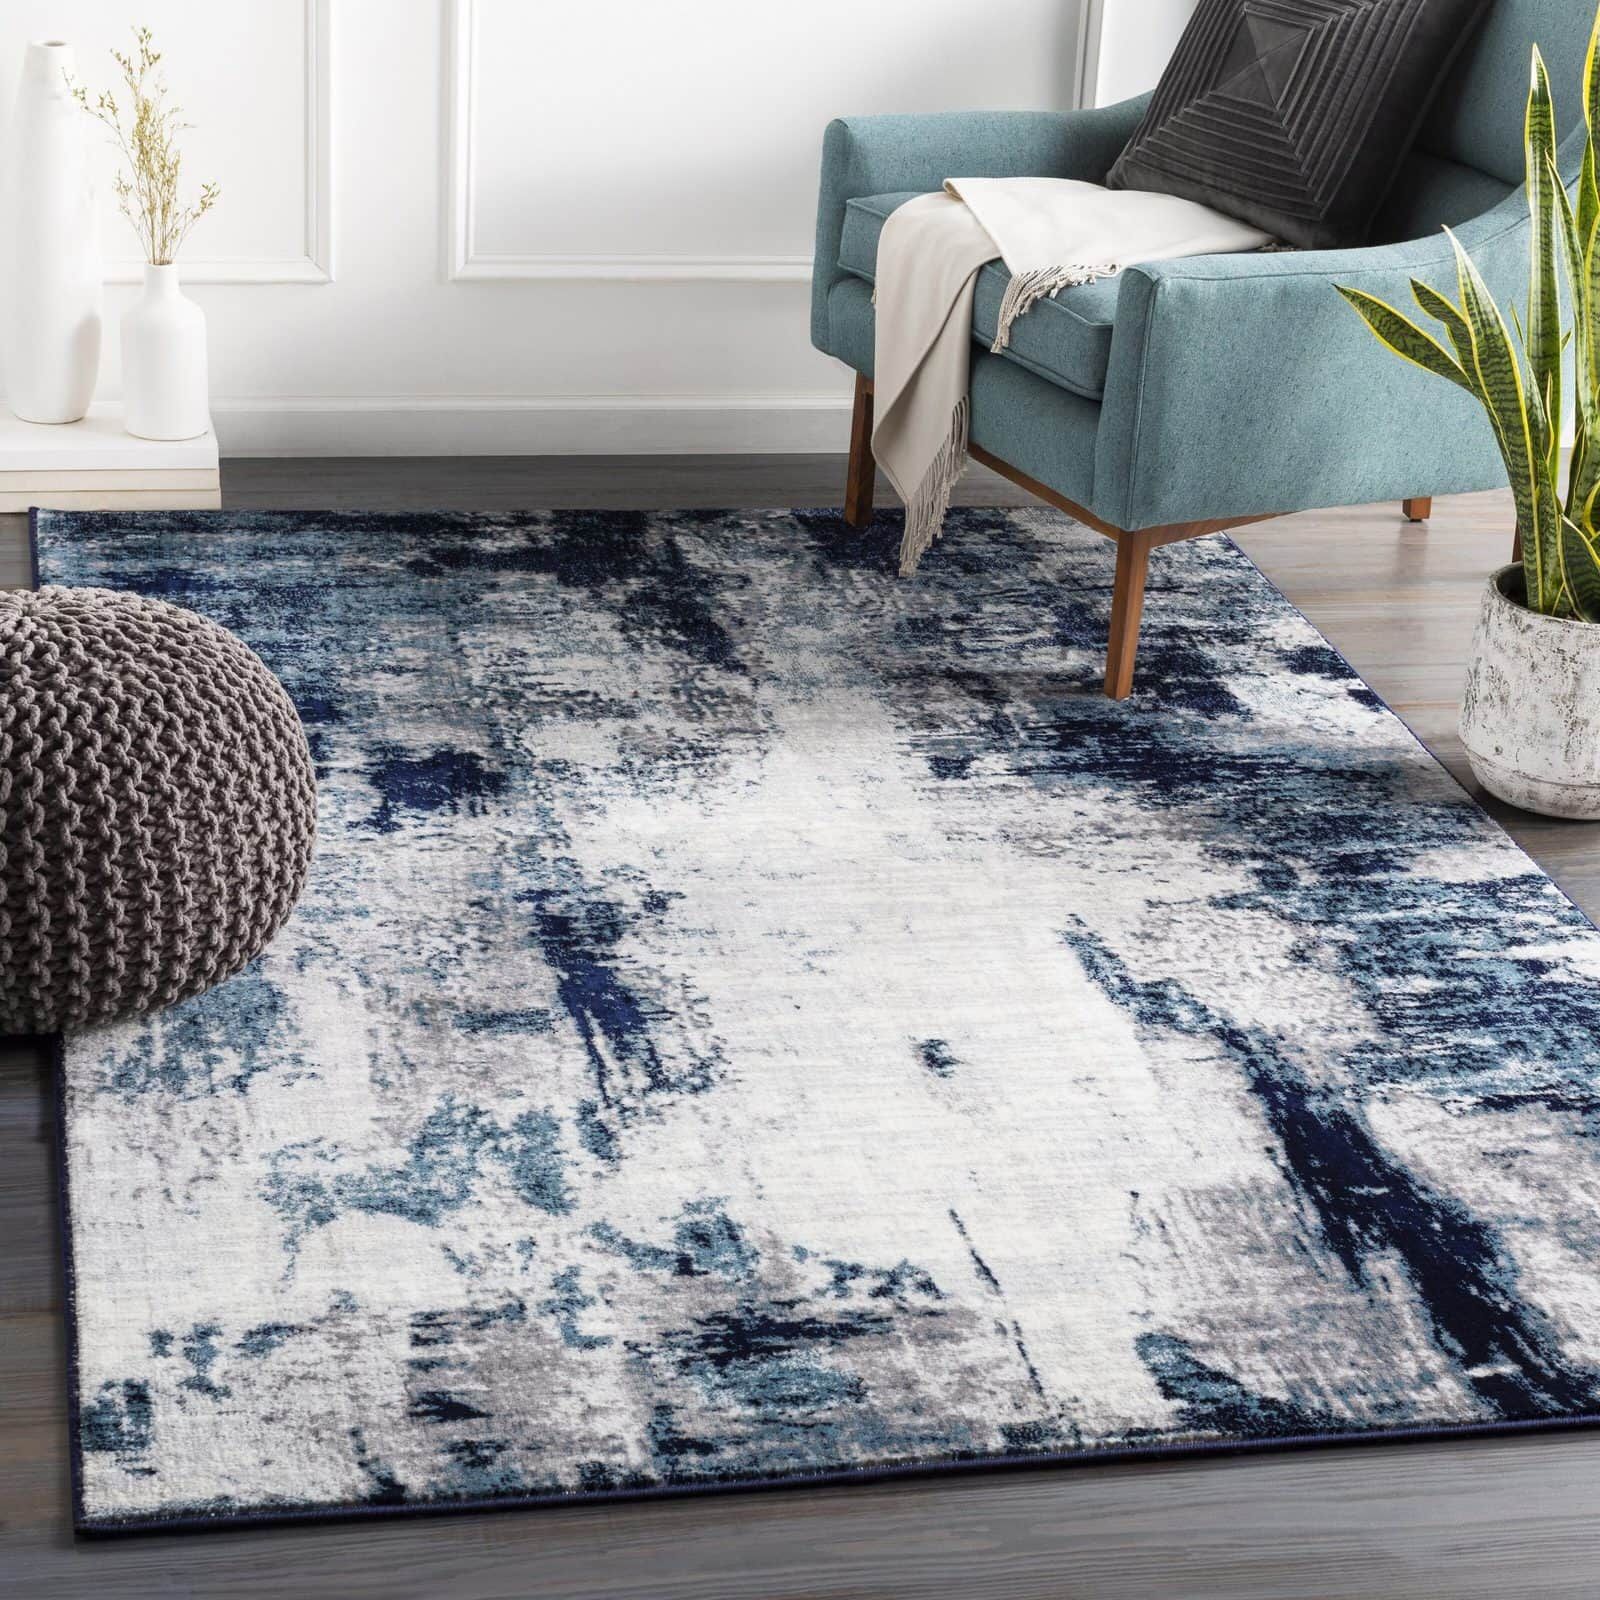 12 Best Navy Blue And White Rugs For Navy Blue Rugs (View 12 of 15)